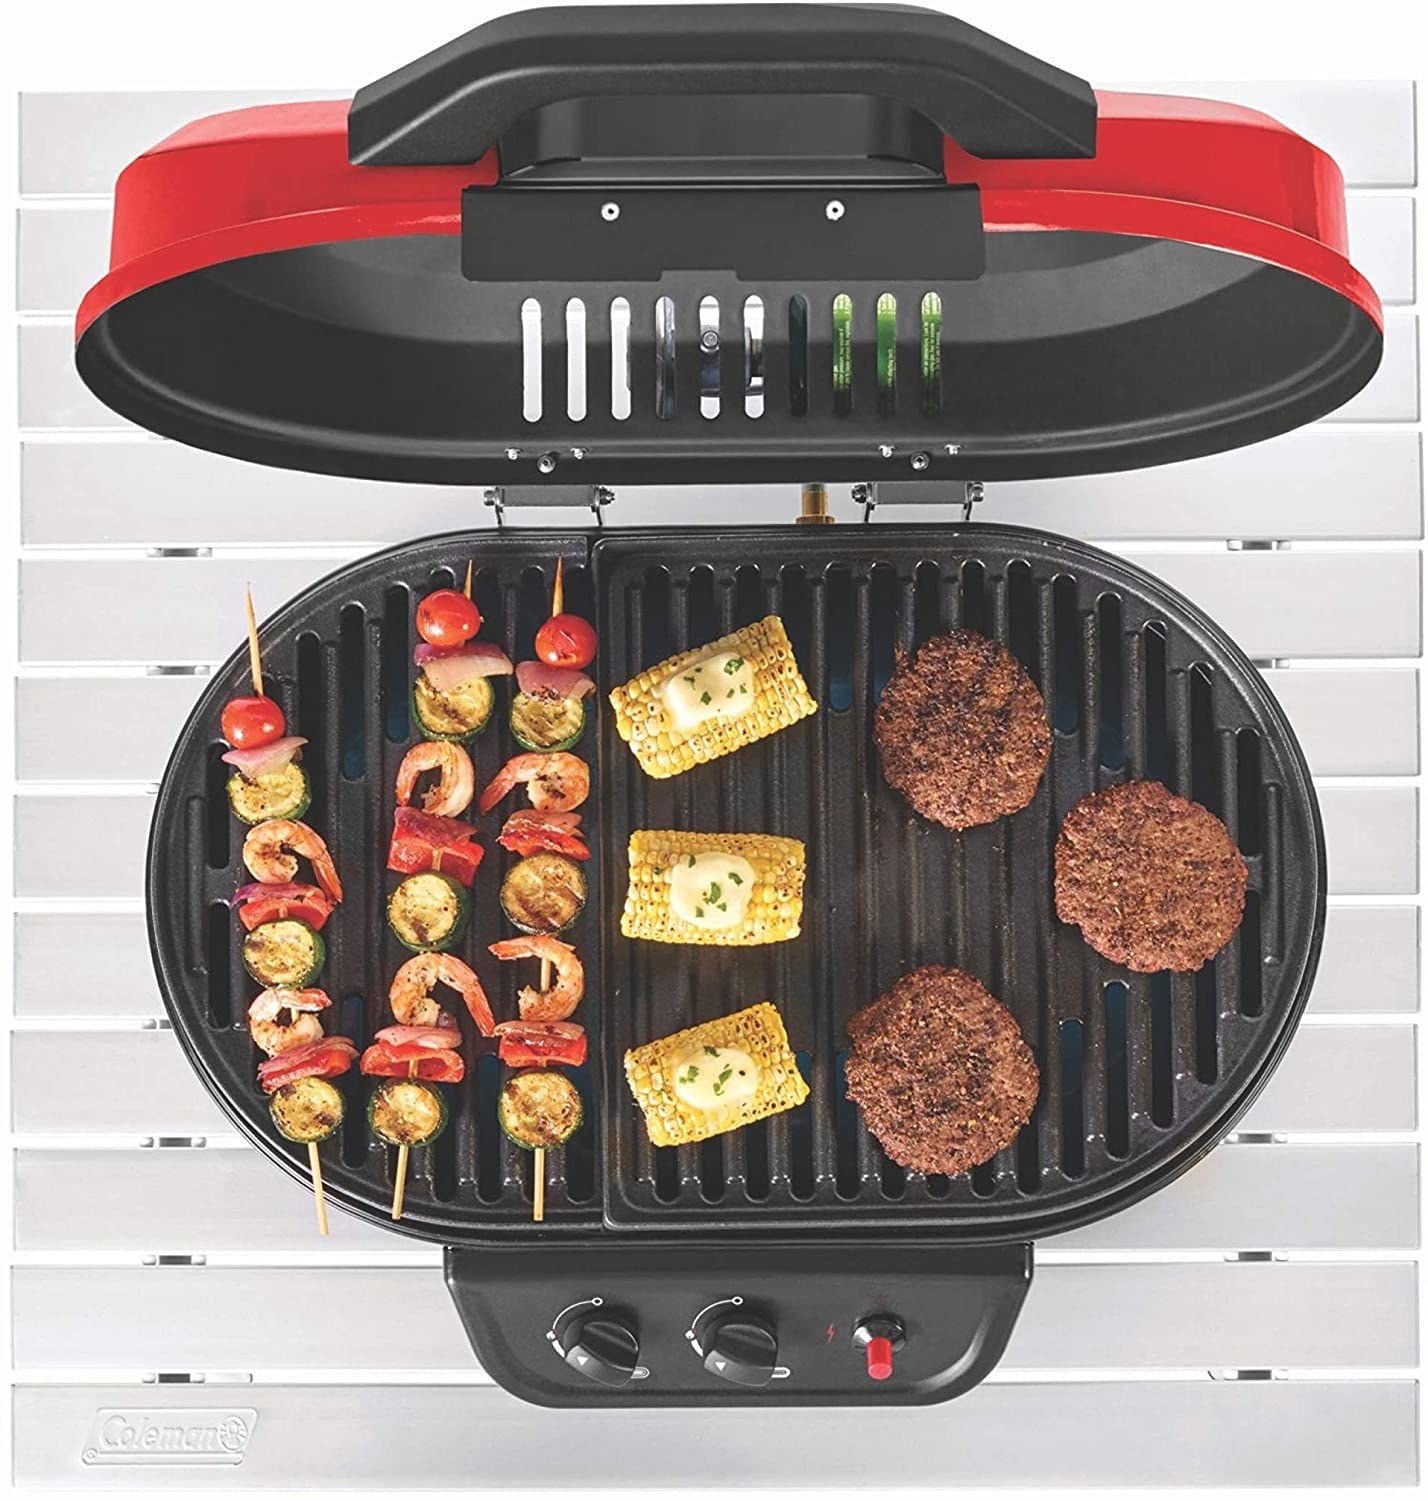 Red portable grill with kebabs, corn, and burgers cooking on it